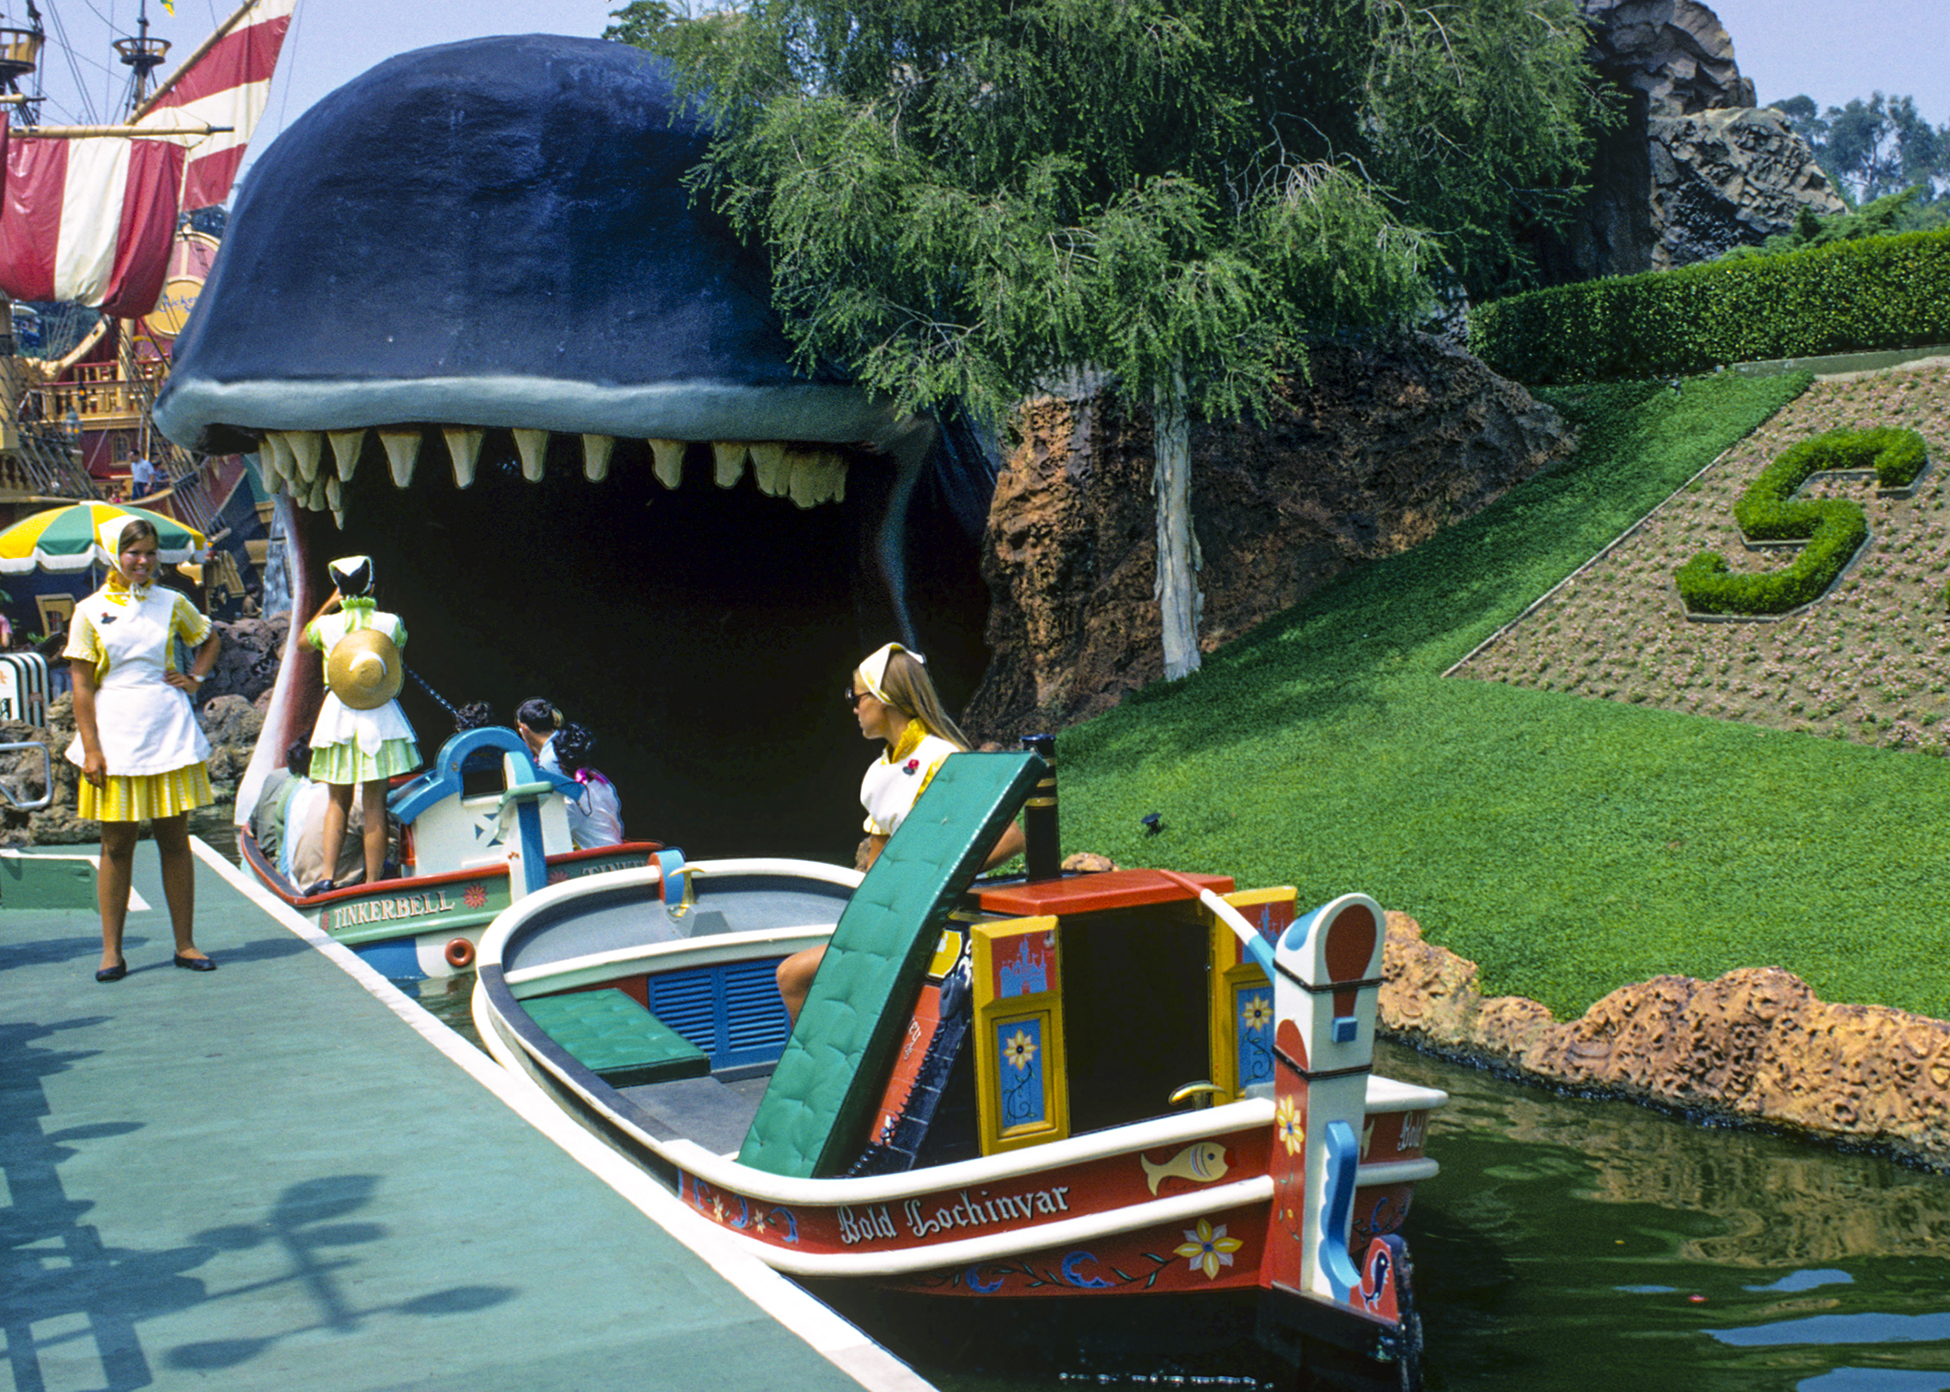 Cast Members work loading area near Monstro the Whale on Storybook Land Canal Boats